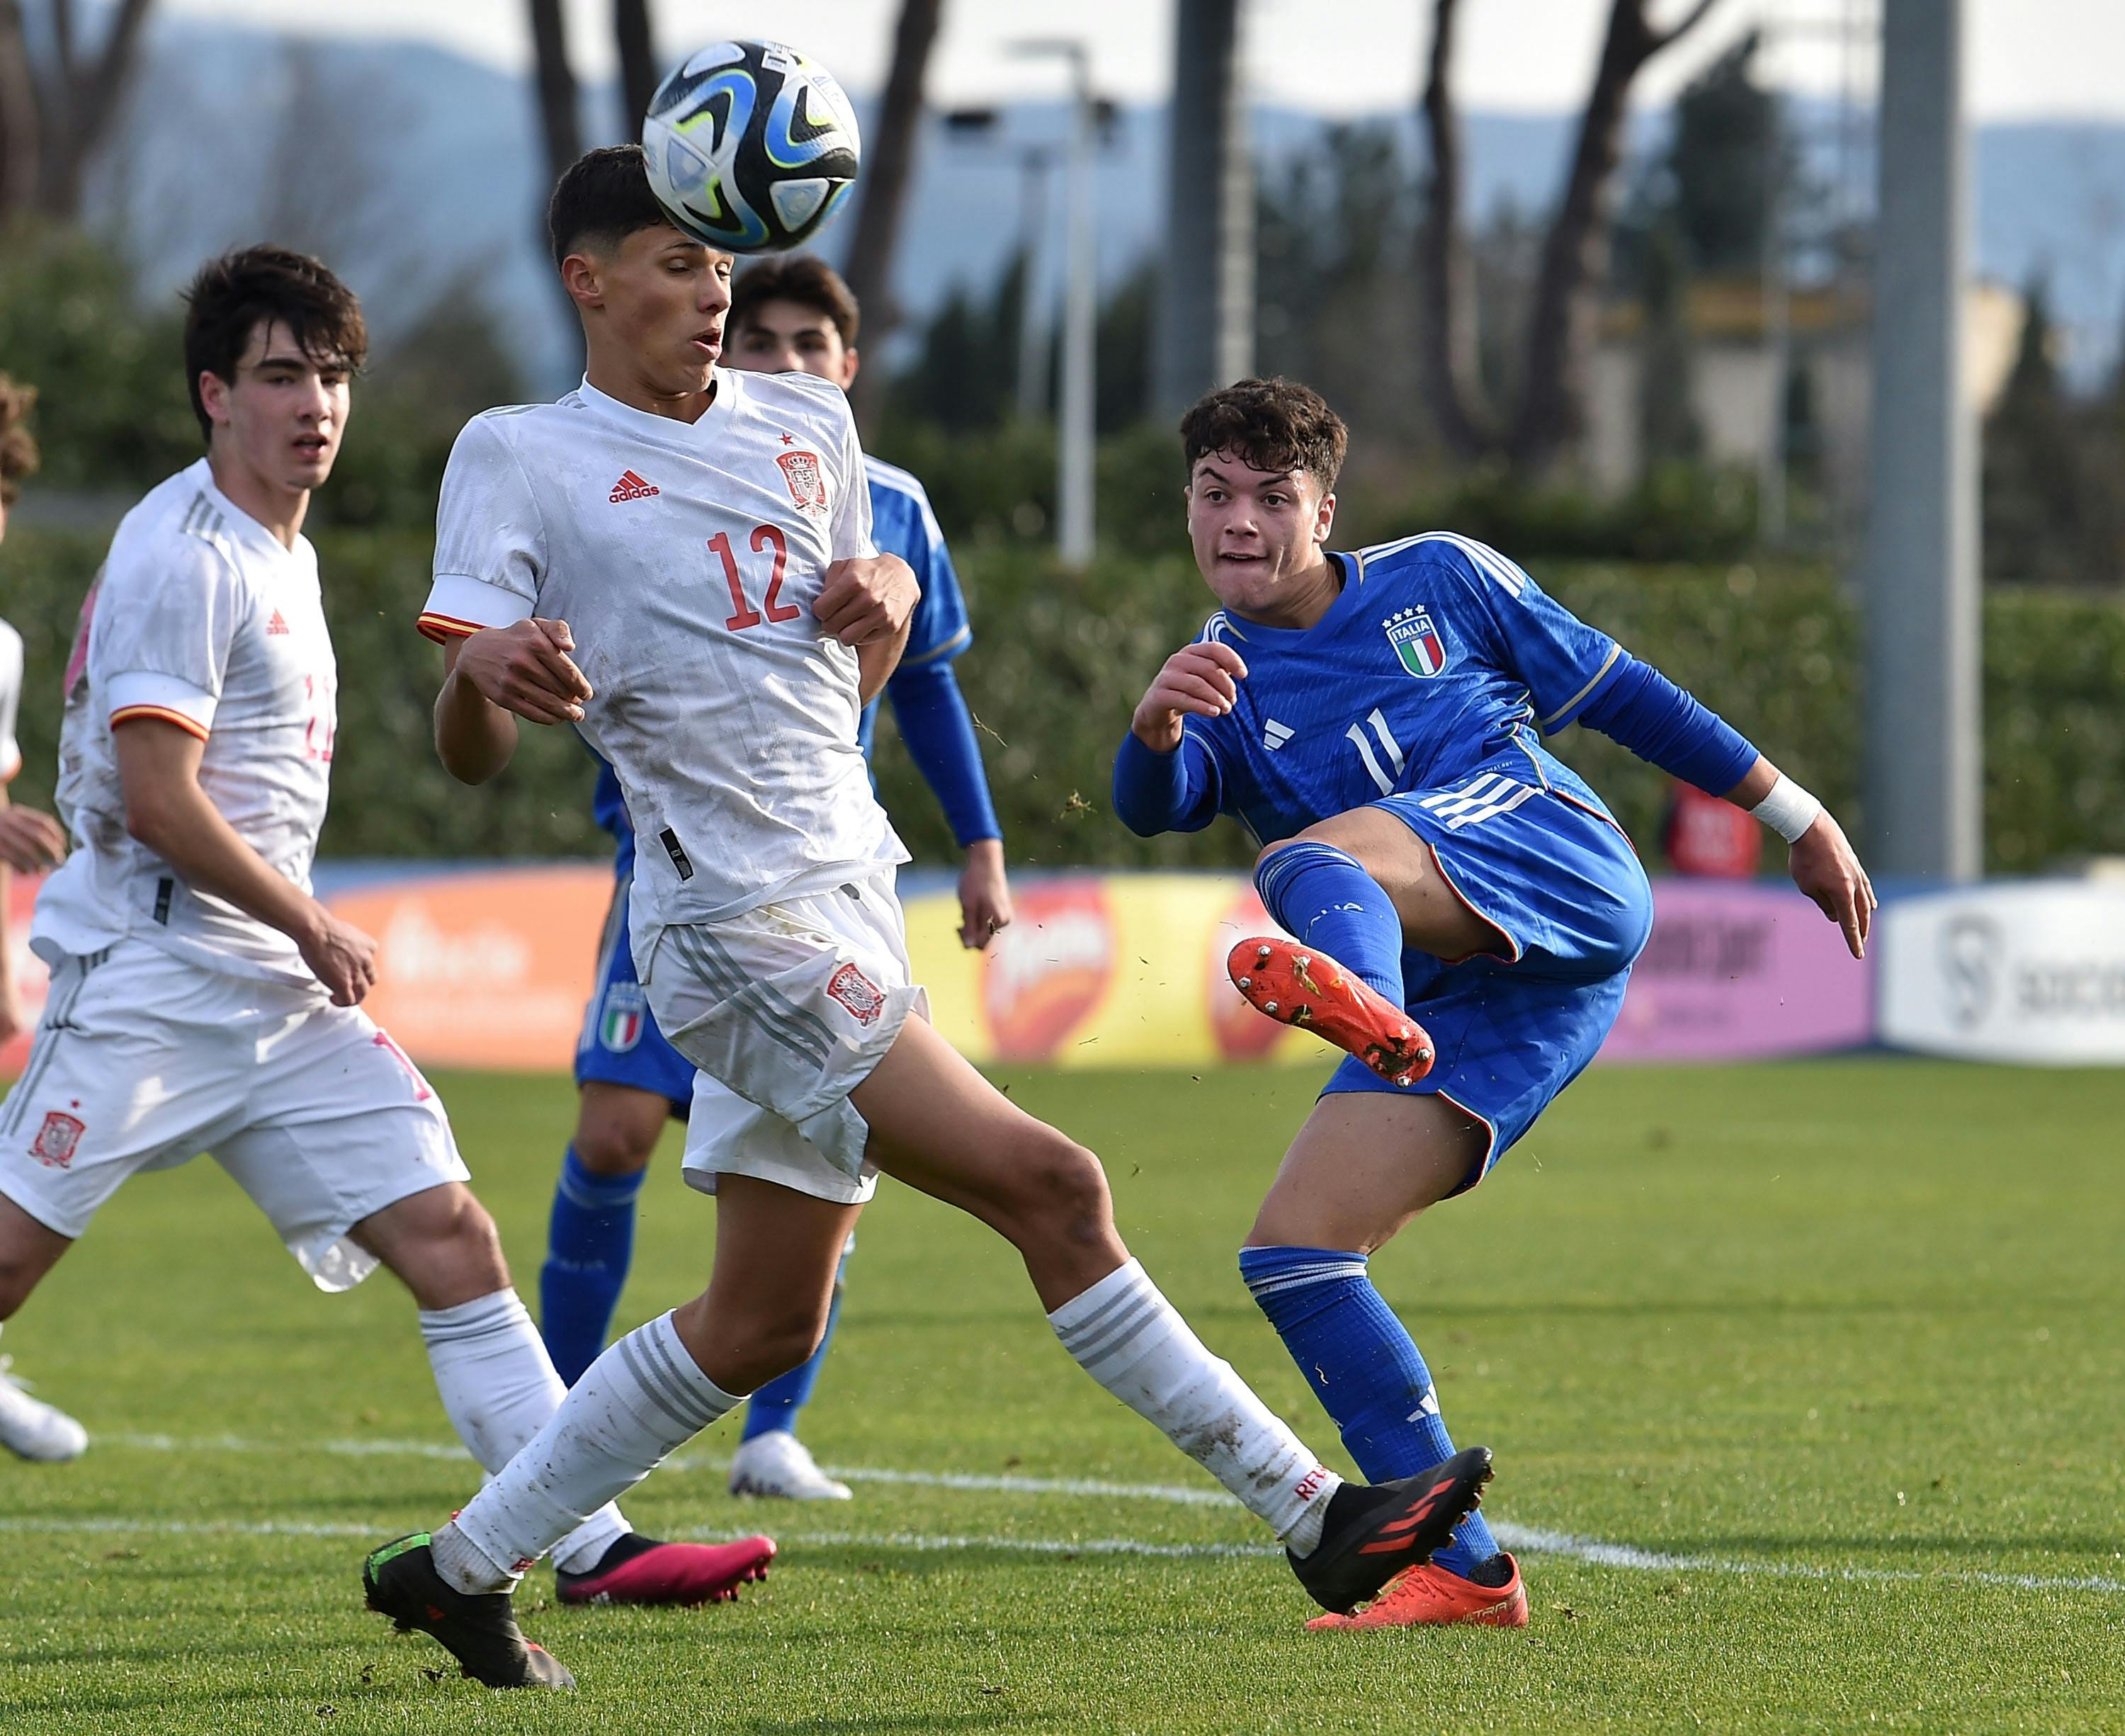 Emanuele Rao in goal with Italy Under-17 team